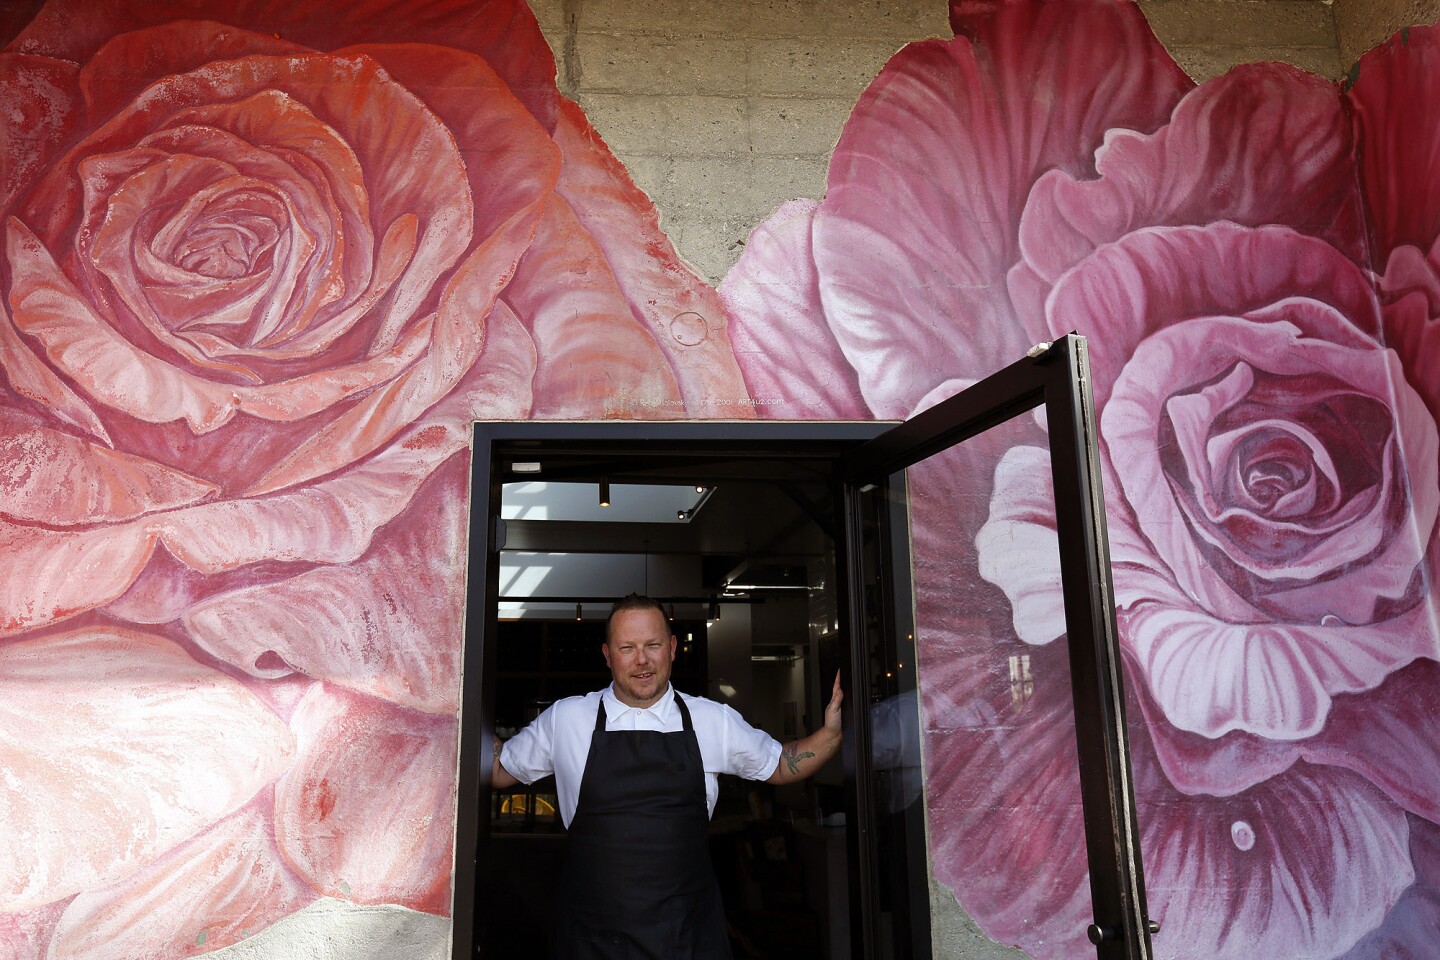 Chef Jason Neroni stands in the main doorway to the Rose Cafe in Venice.